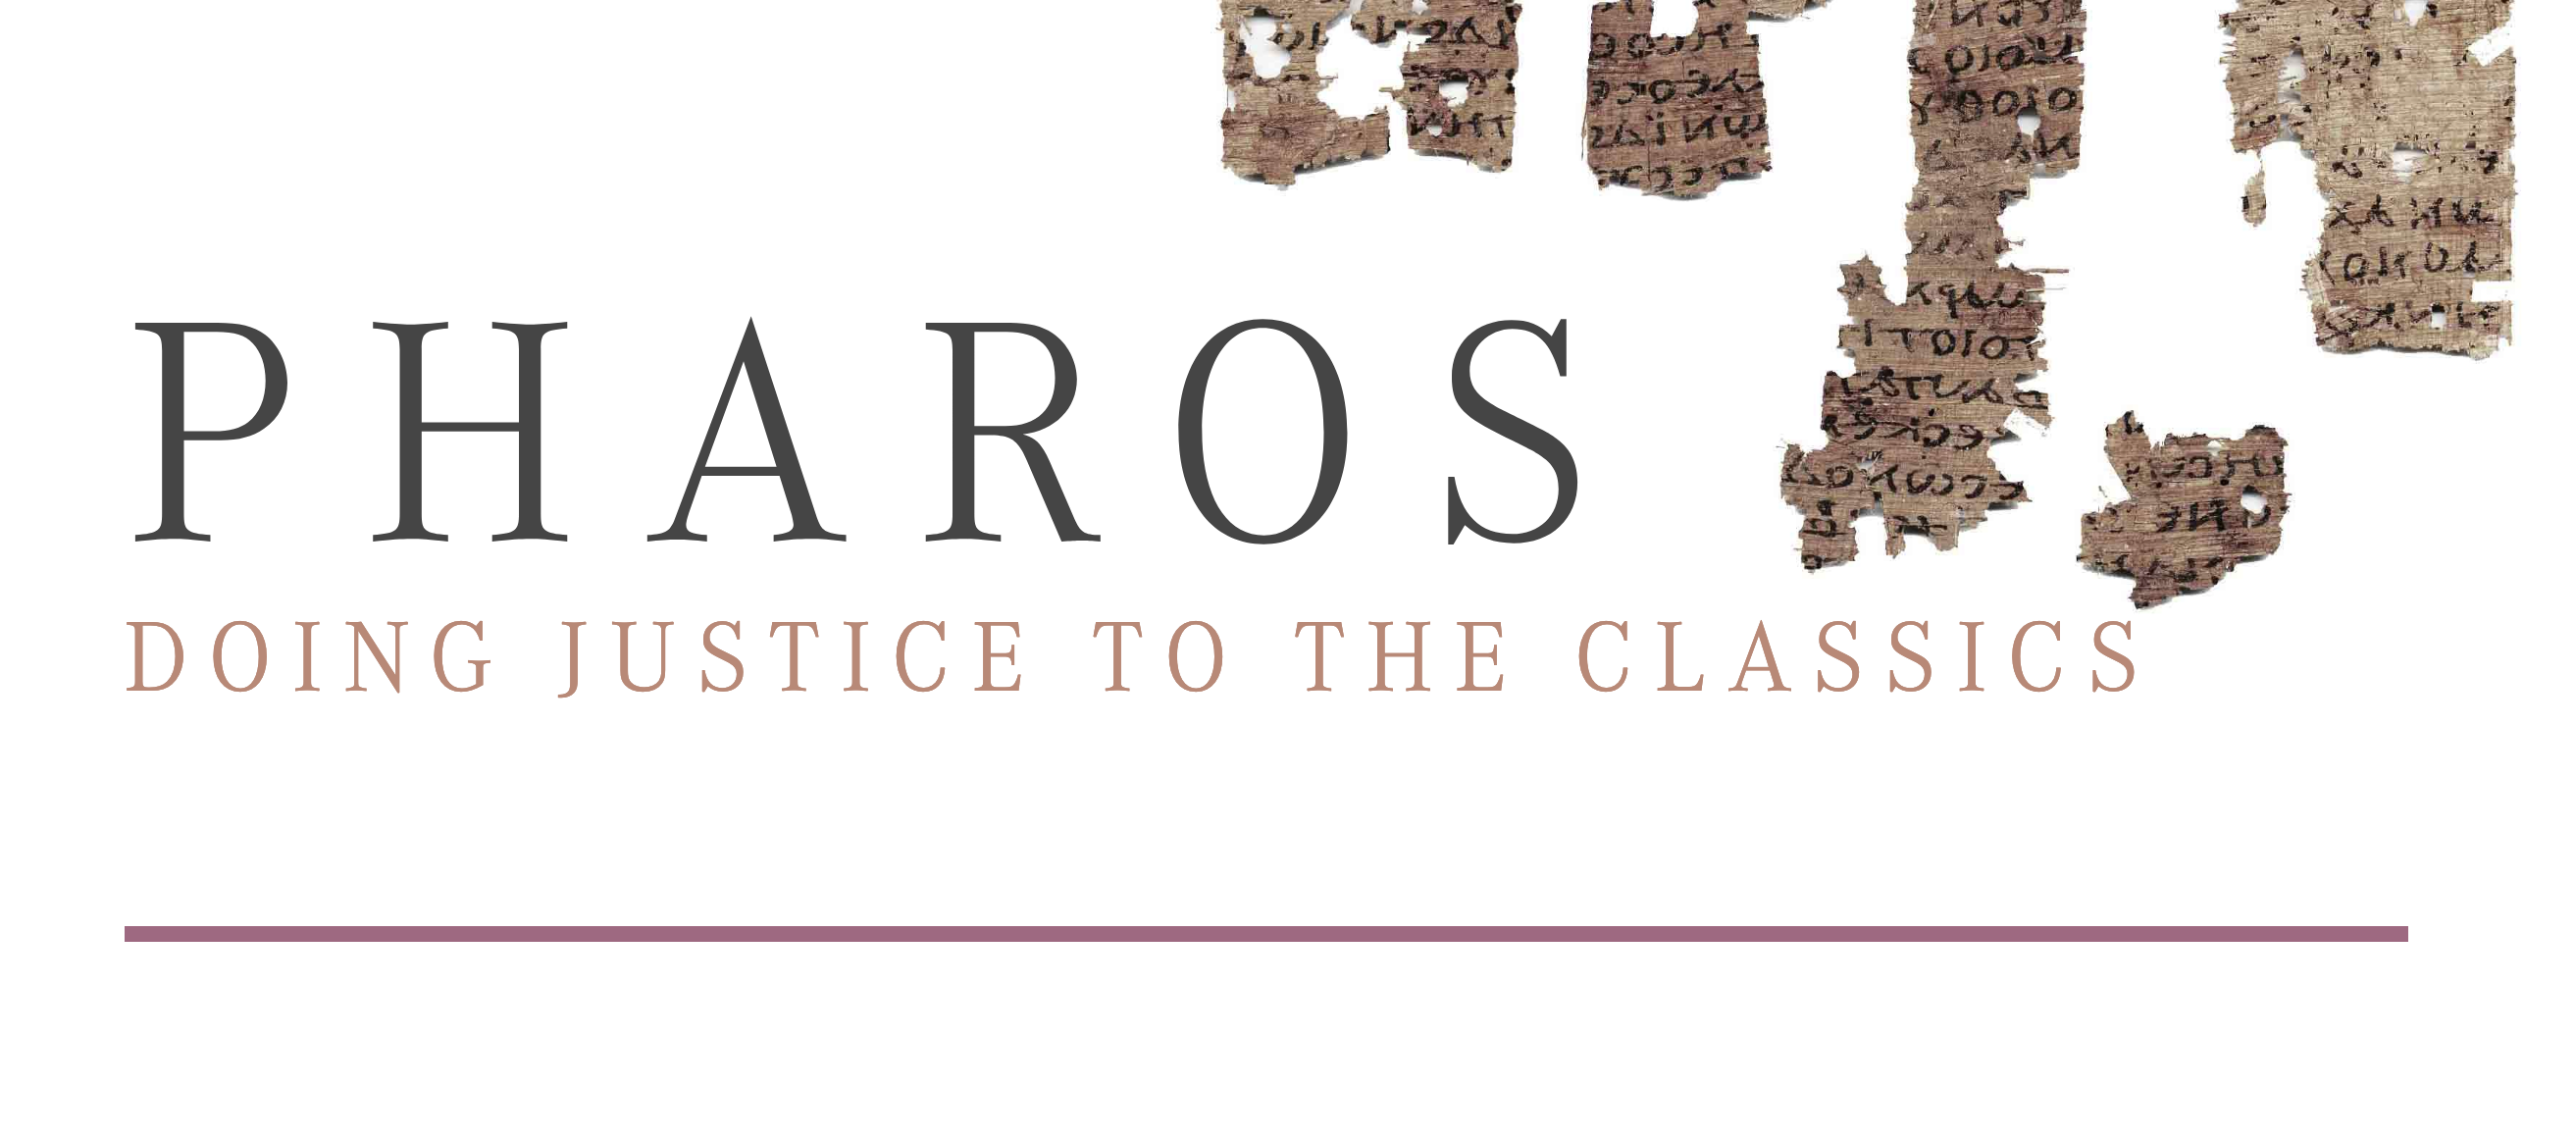 Pharos: Doing Justice to the Classics